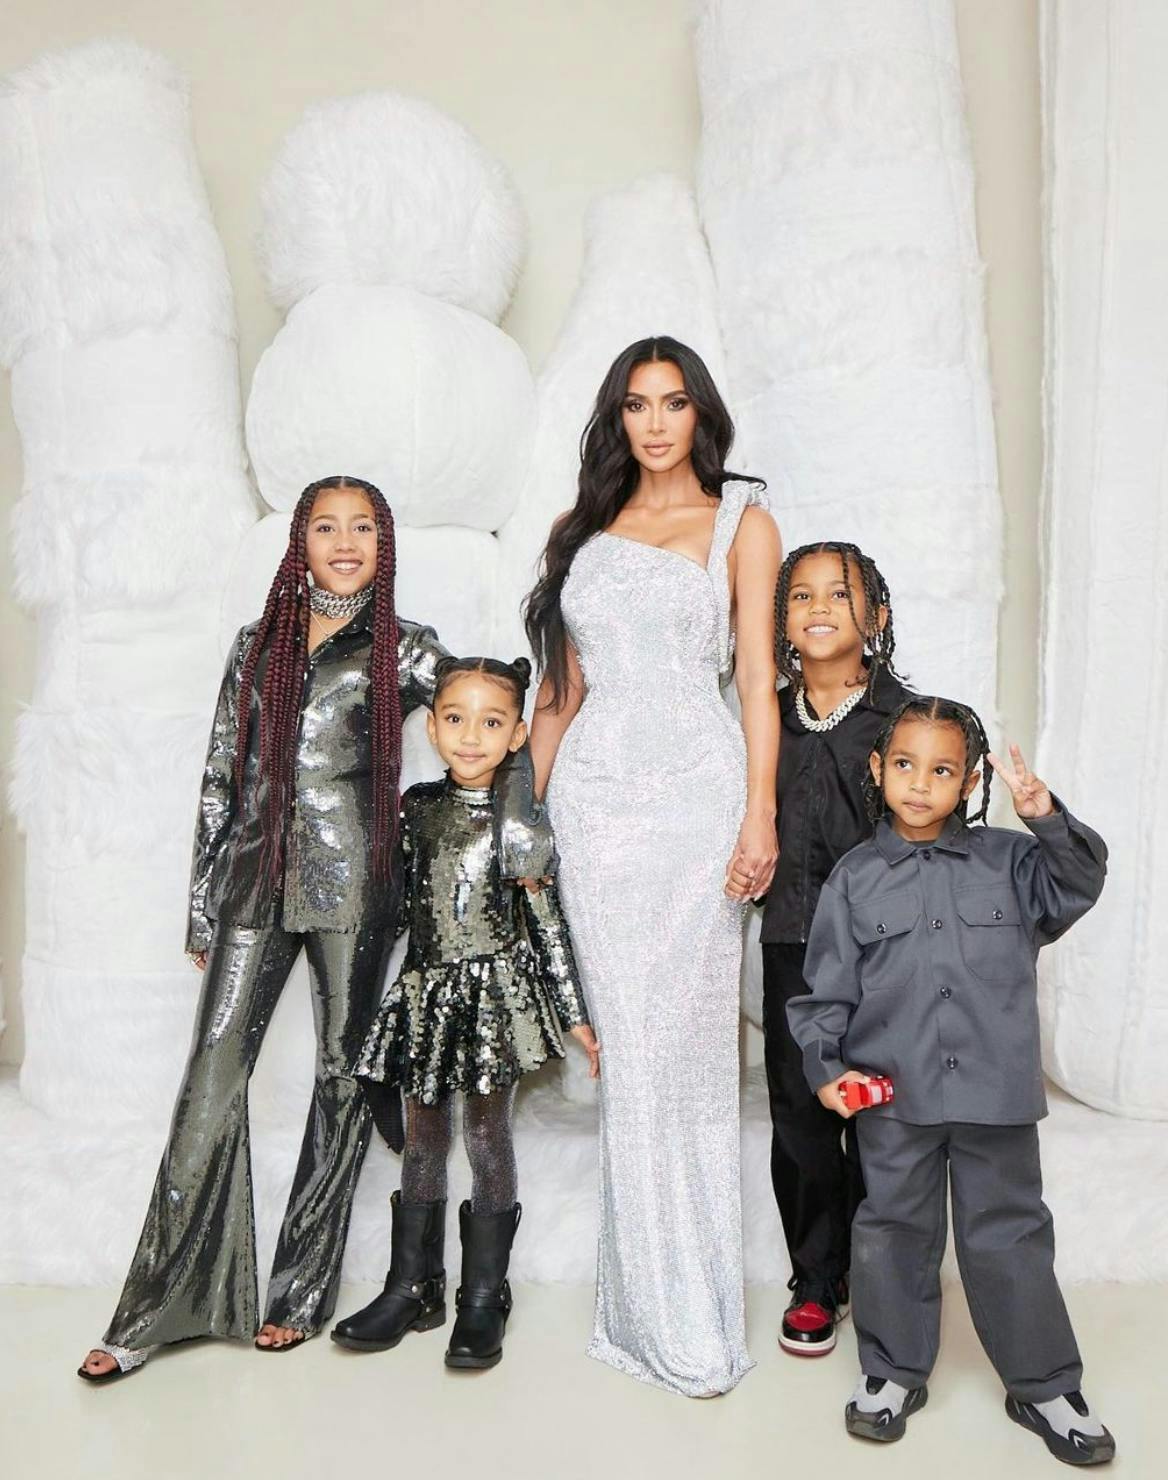 unique celebrity baby names: Kim Kardashian and her children, North, Saint, Chicago, and Psalm West.